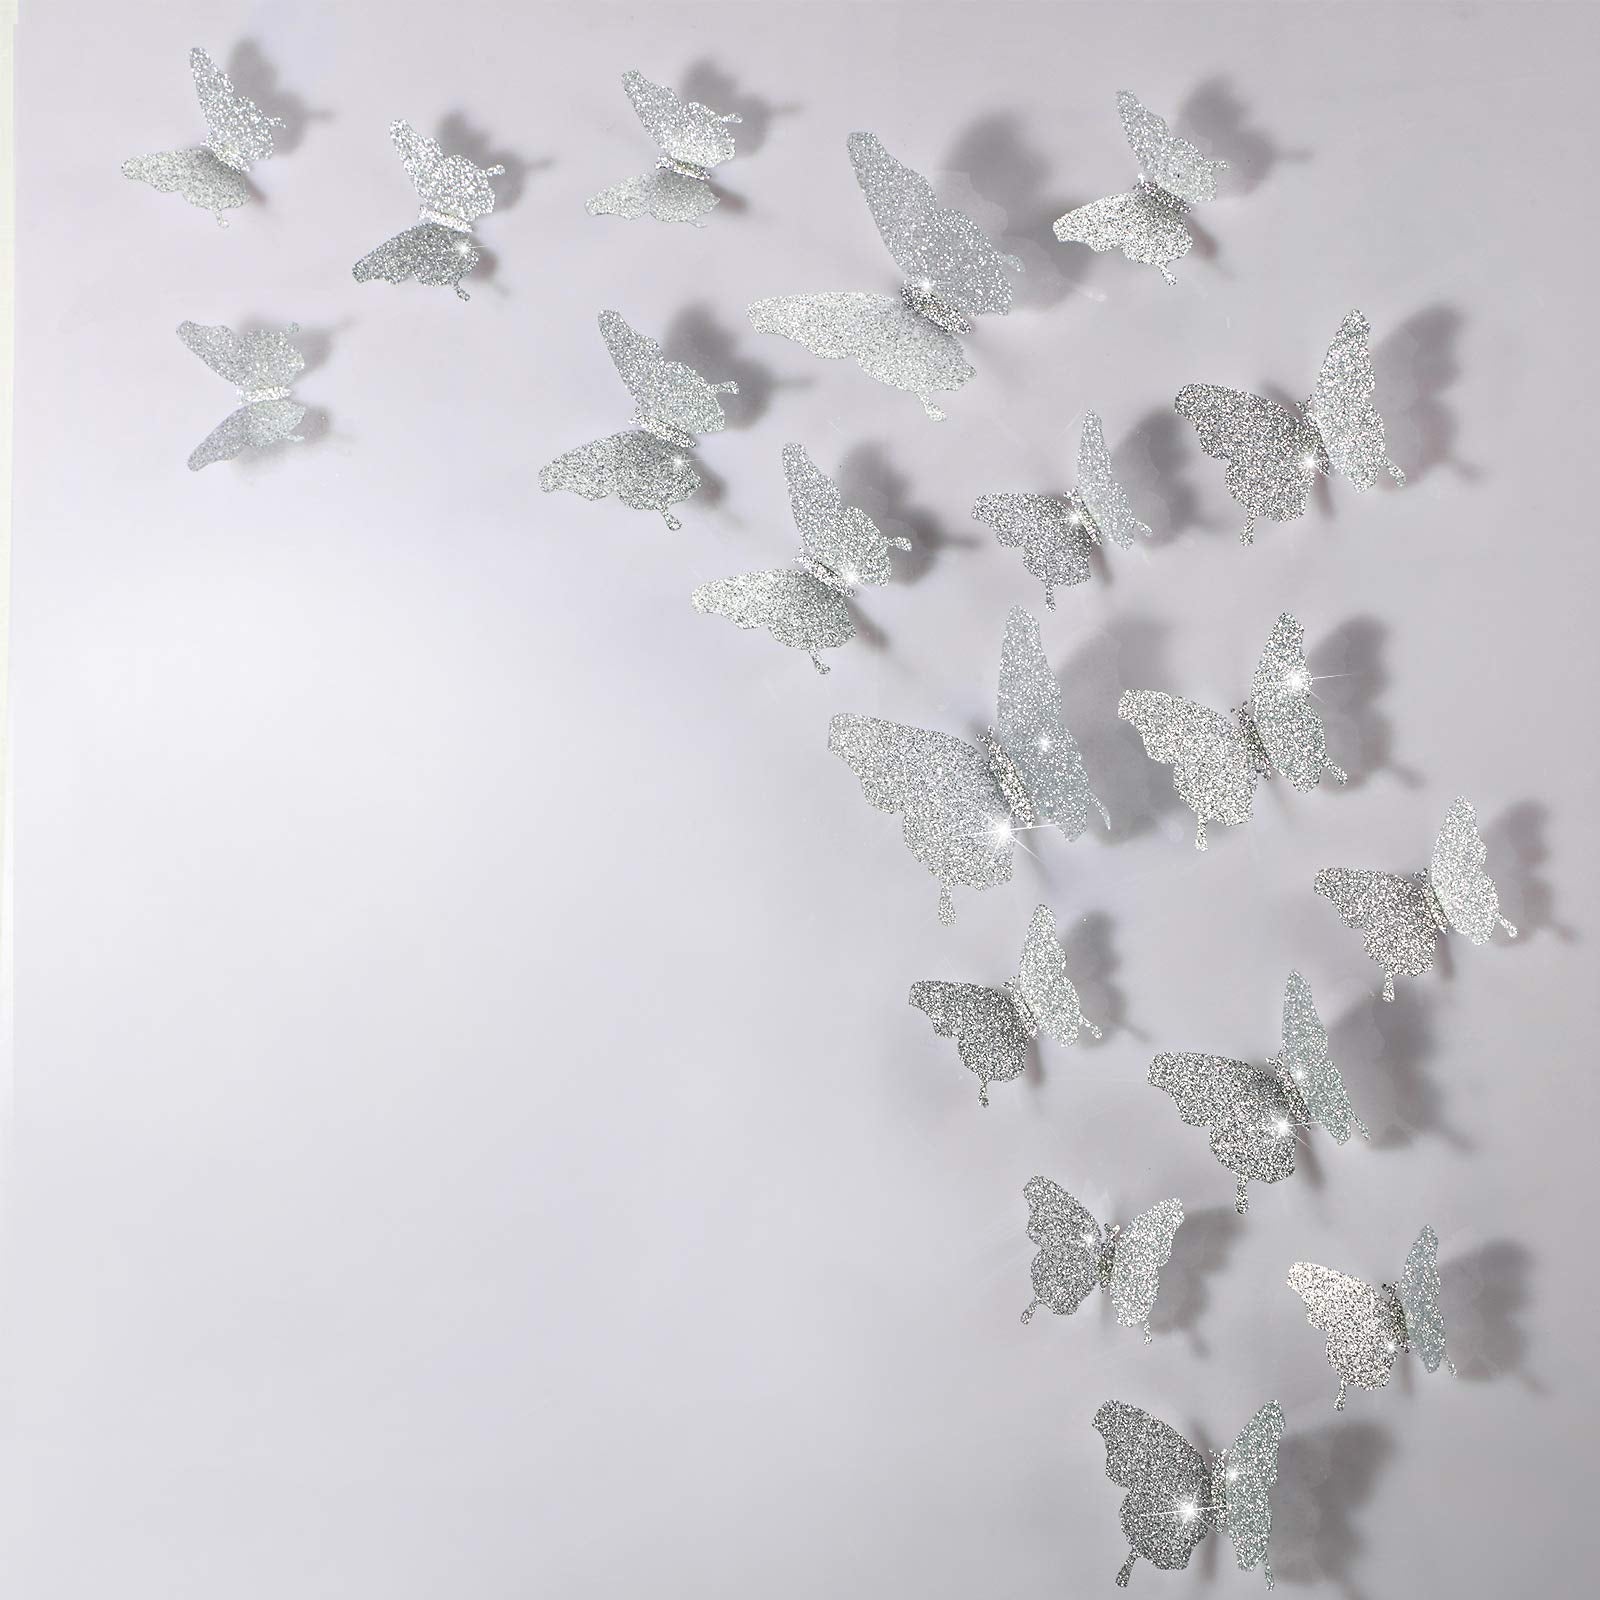 48 Pieces DIY Glitter Butterfly Combination 3D Butterfly Wall Stickers Decals Home Decoration (Glitter Silver)